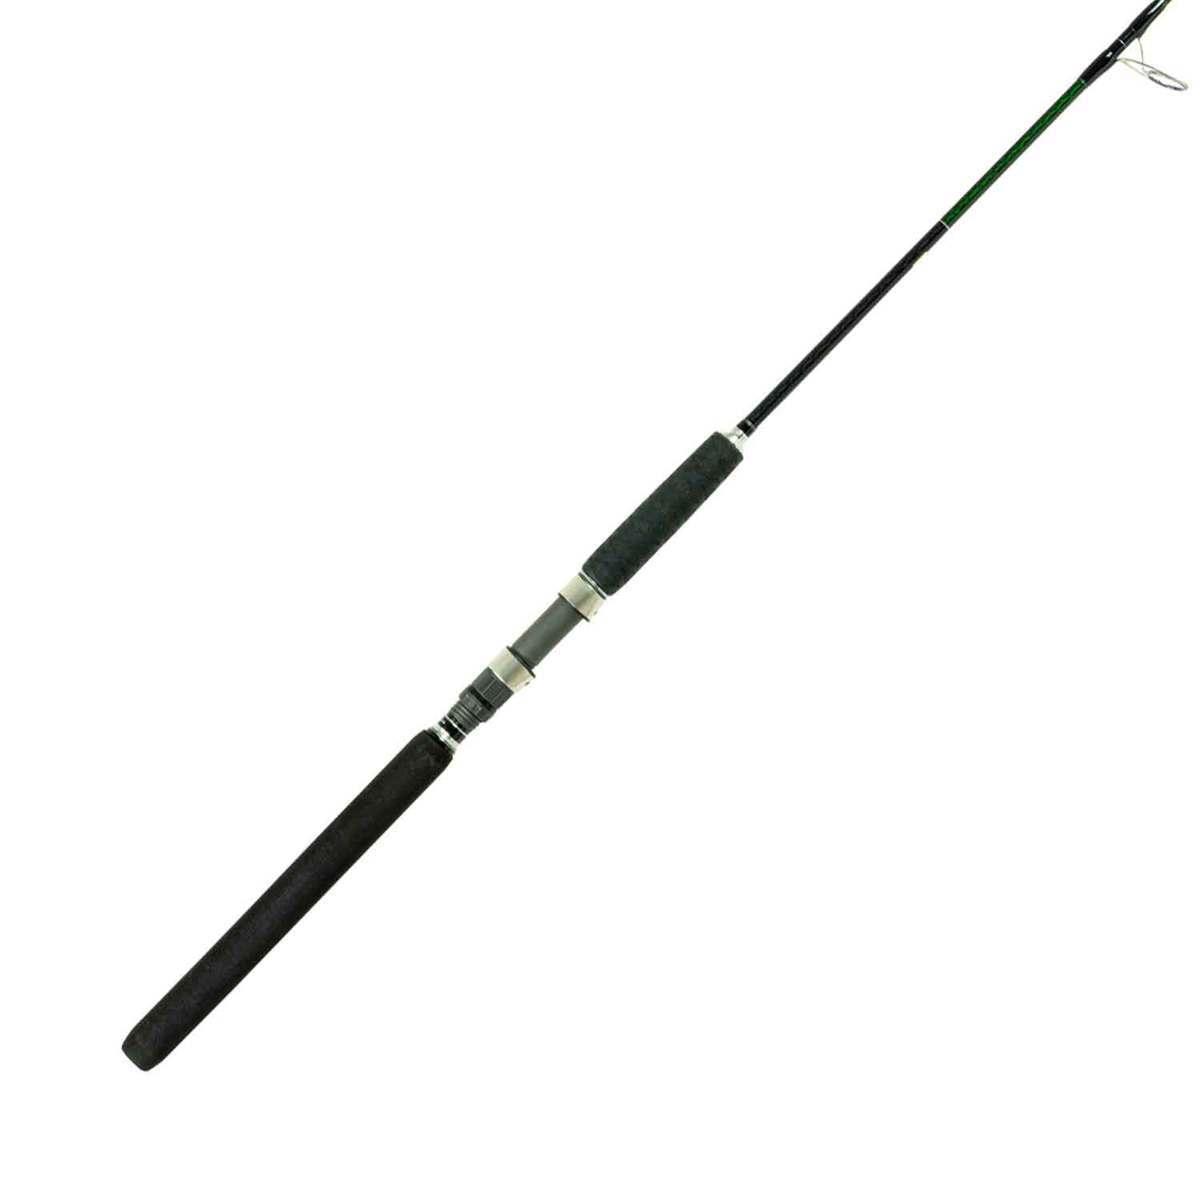 TALLUS PX CONVENTIONAL, BLUEWATER, RODS, PRODUCT